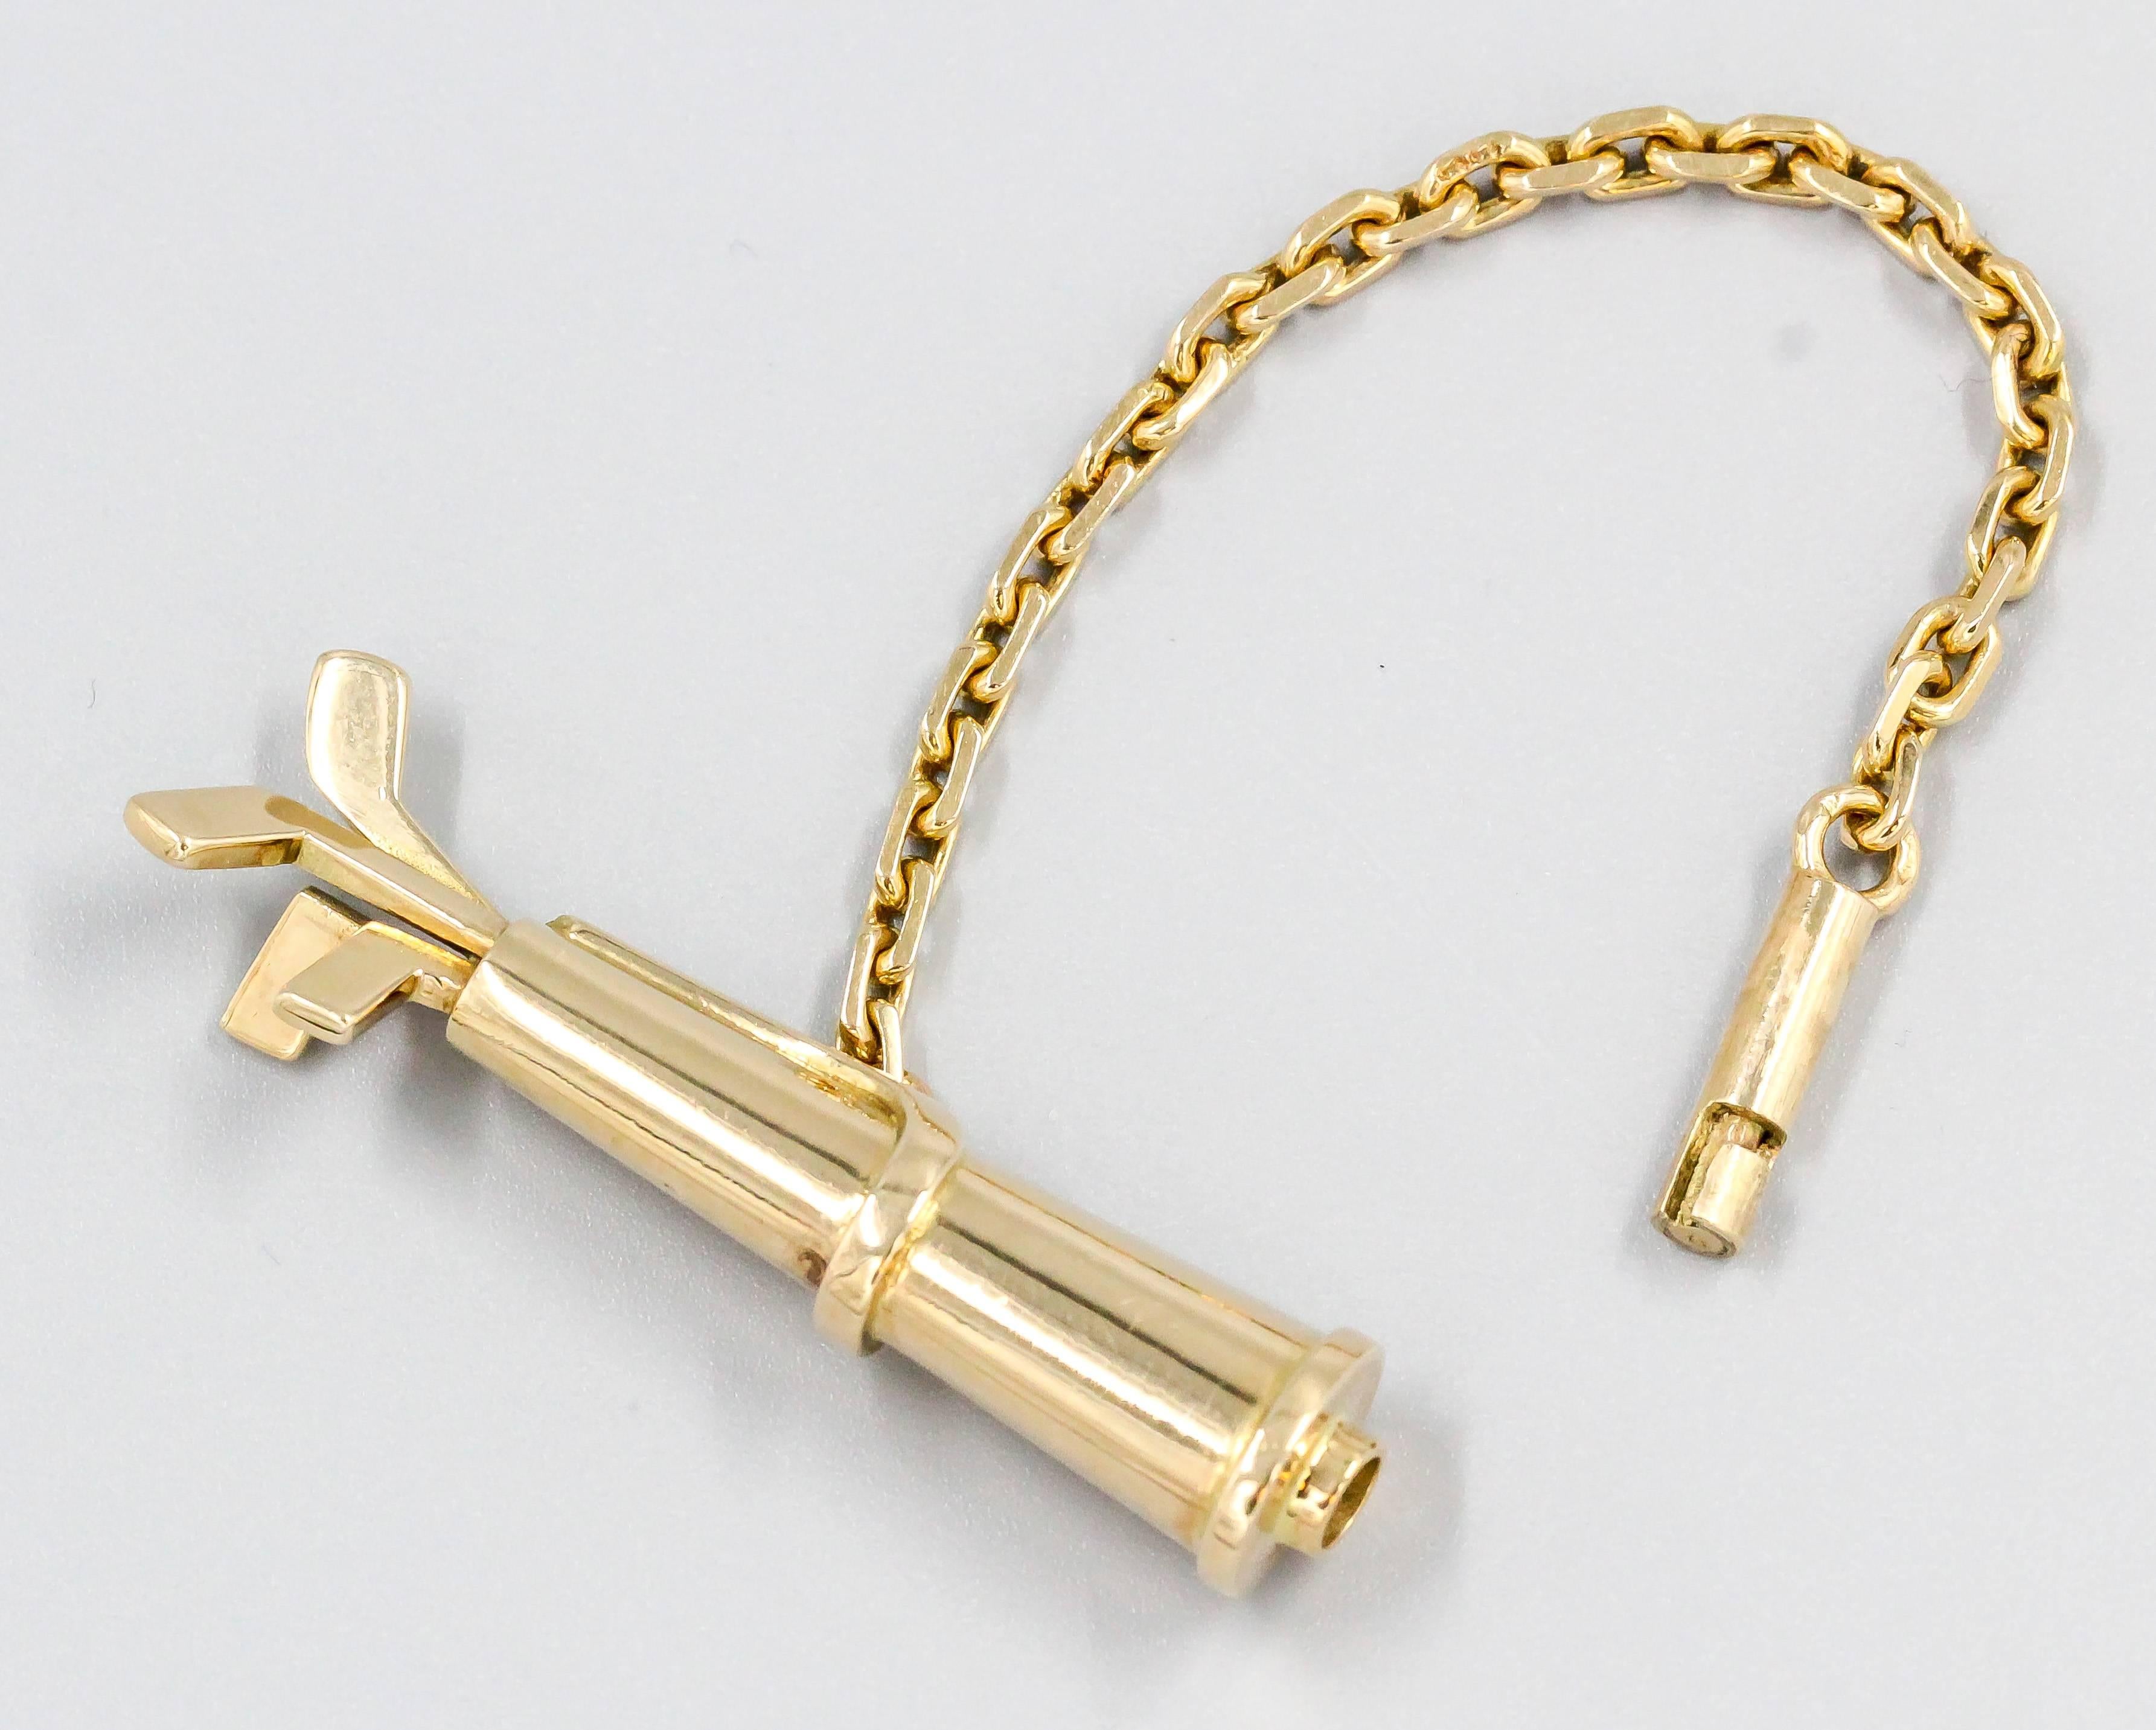 Whimsical 18K yellow gold key chain by Cartier, circa 1980s. Styled as a golf club bag, it offers a wonderful gift idea for a golf enthusiast.
Hallmarks: Cartier, 18k, reference numbers.